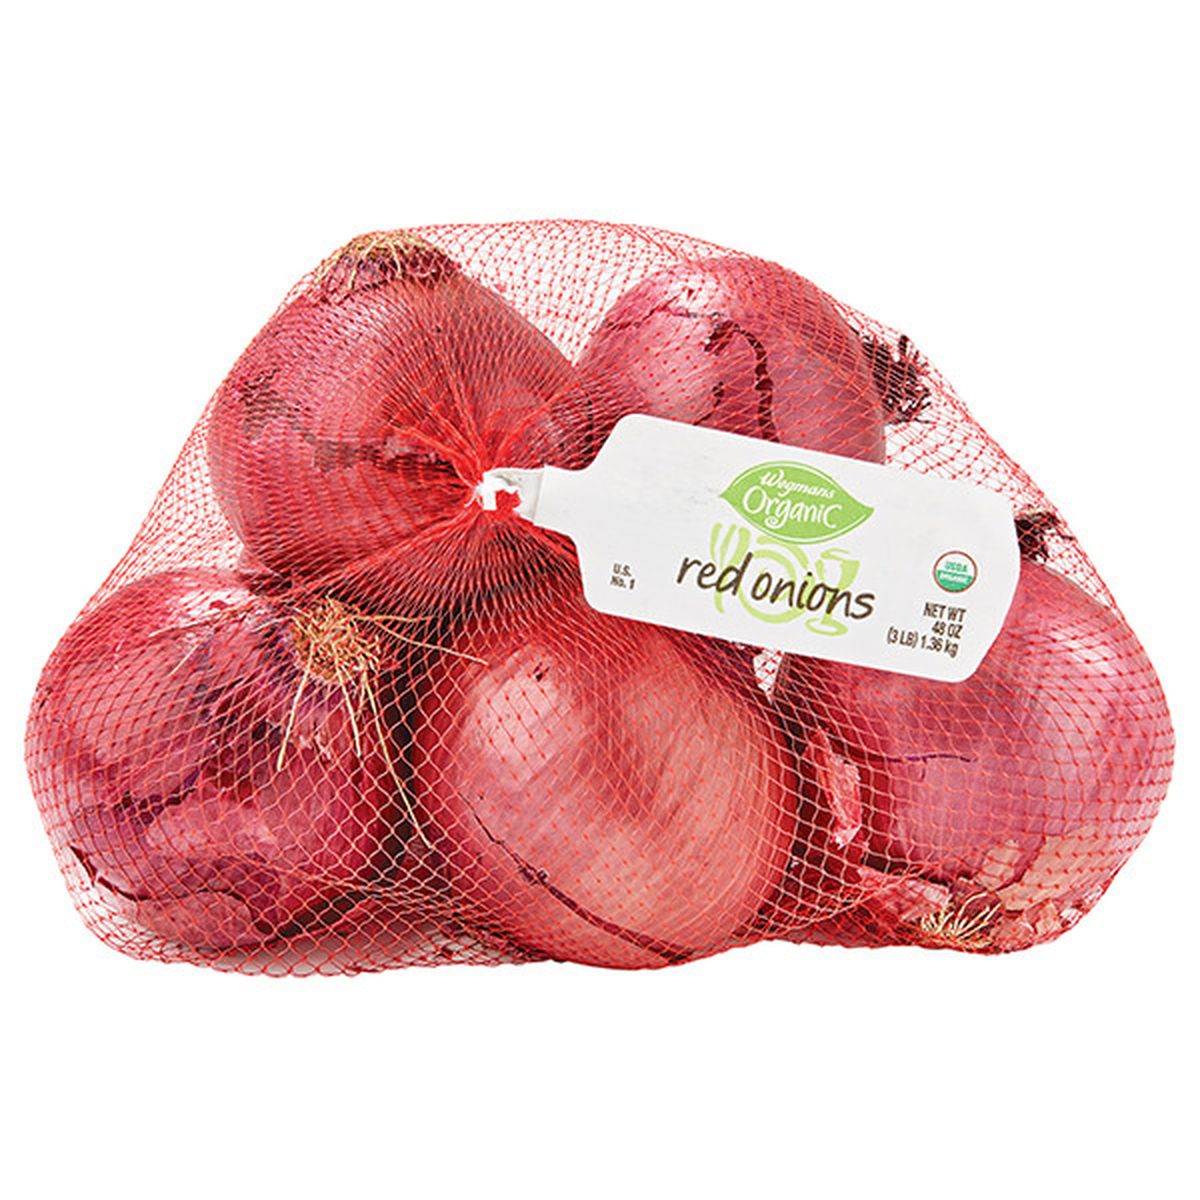 Calories in Organic Onions, Red